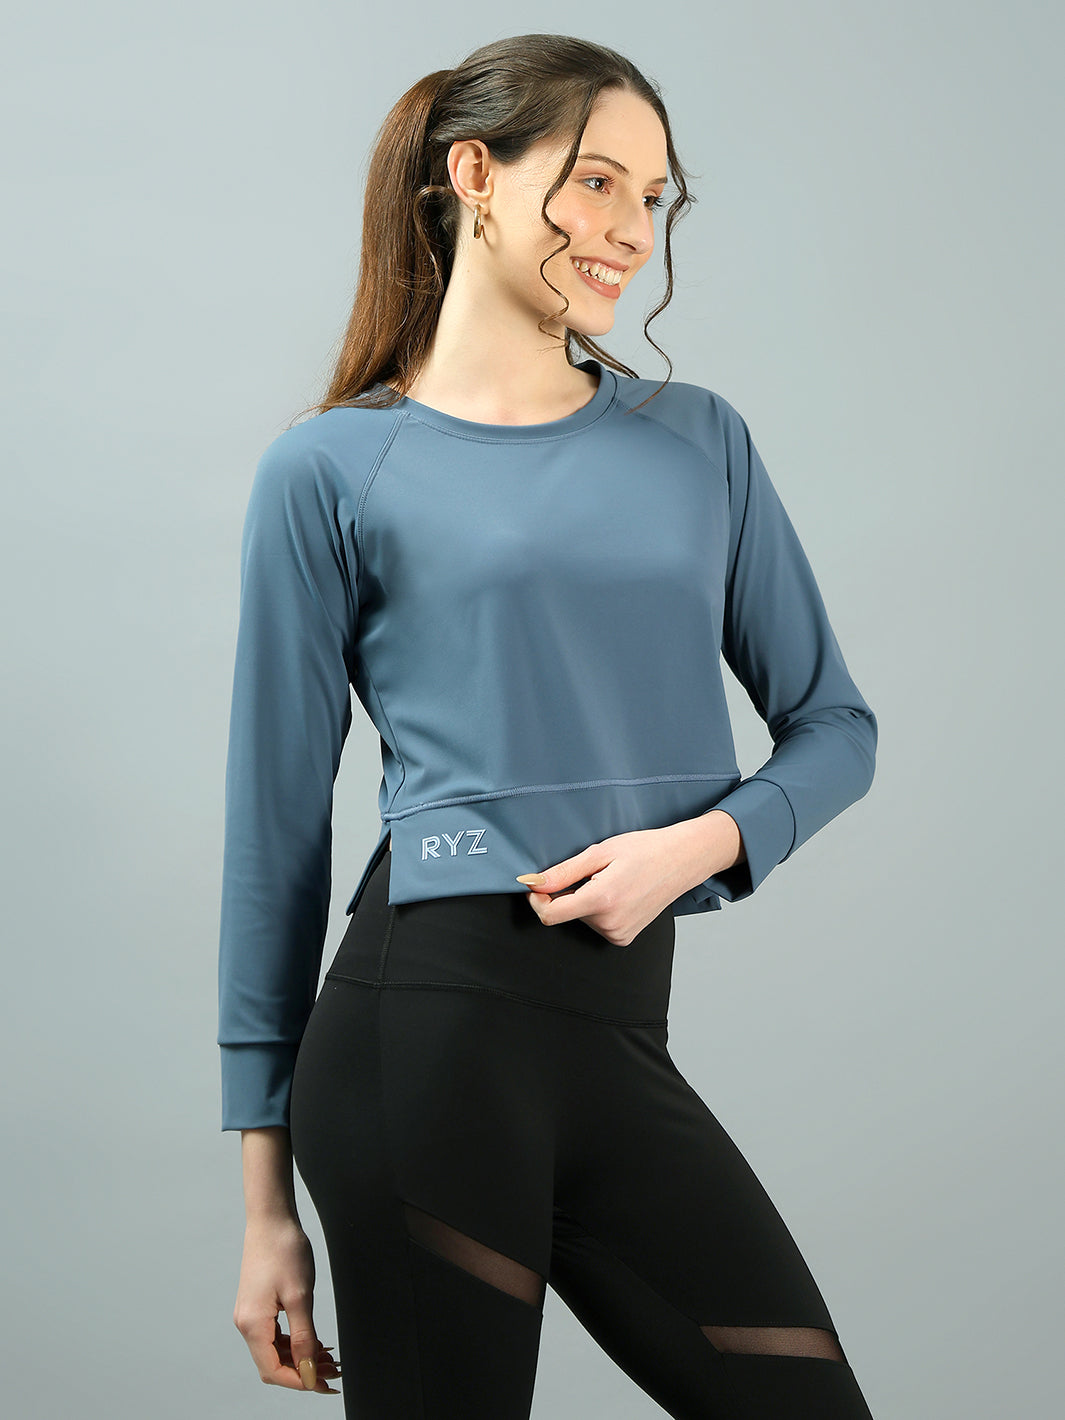 Softretch All Seasons Breathable Top | Full sleeves Sports Top